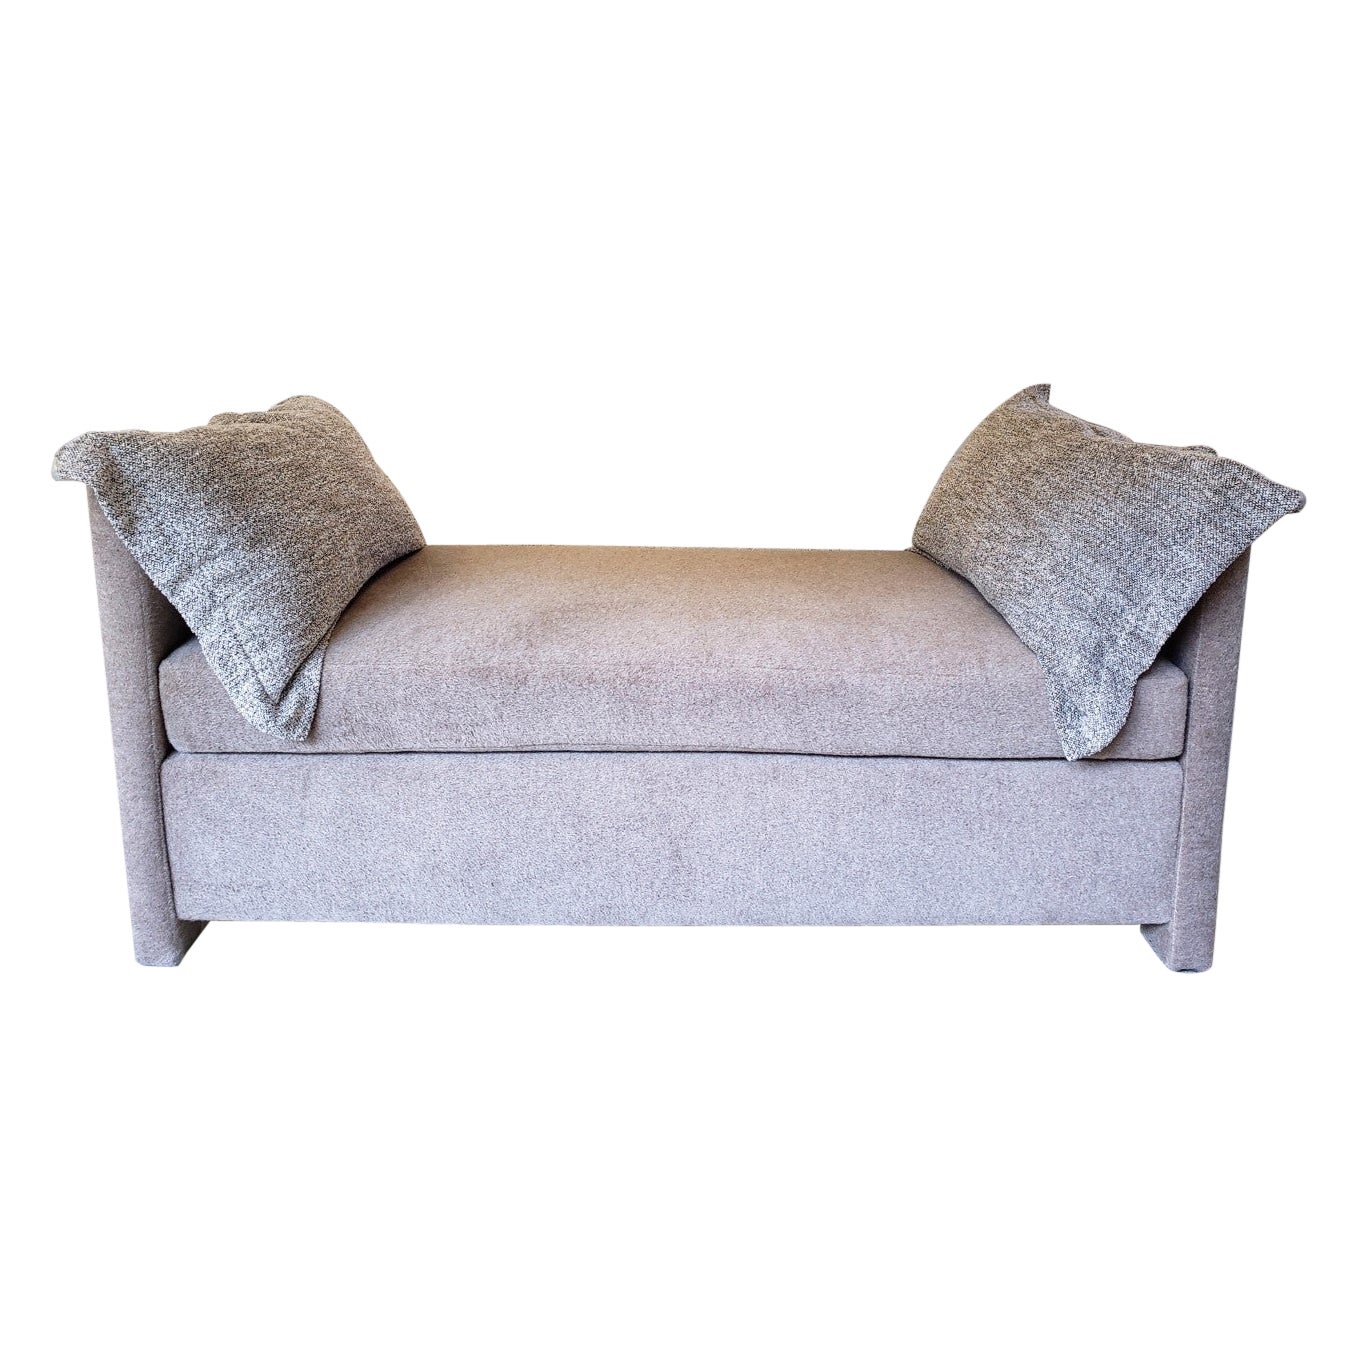 Custom Upholstered Daybed with Two Pillows For Sale